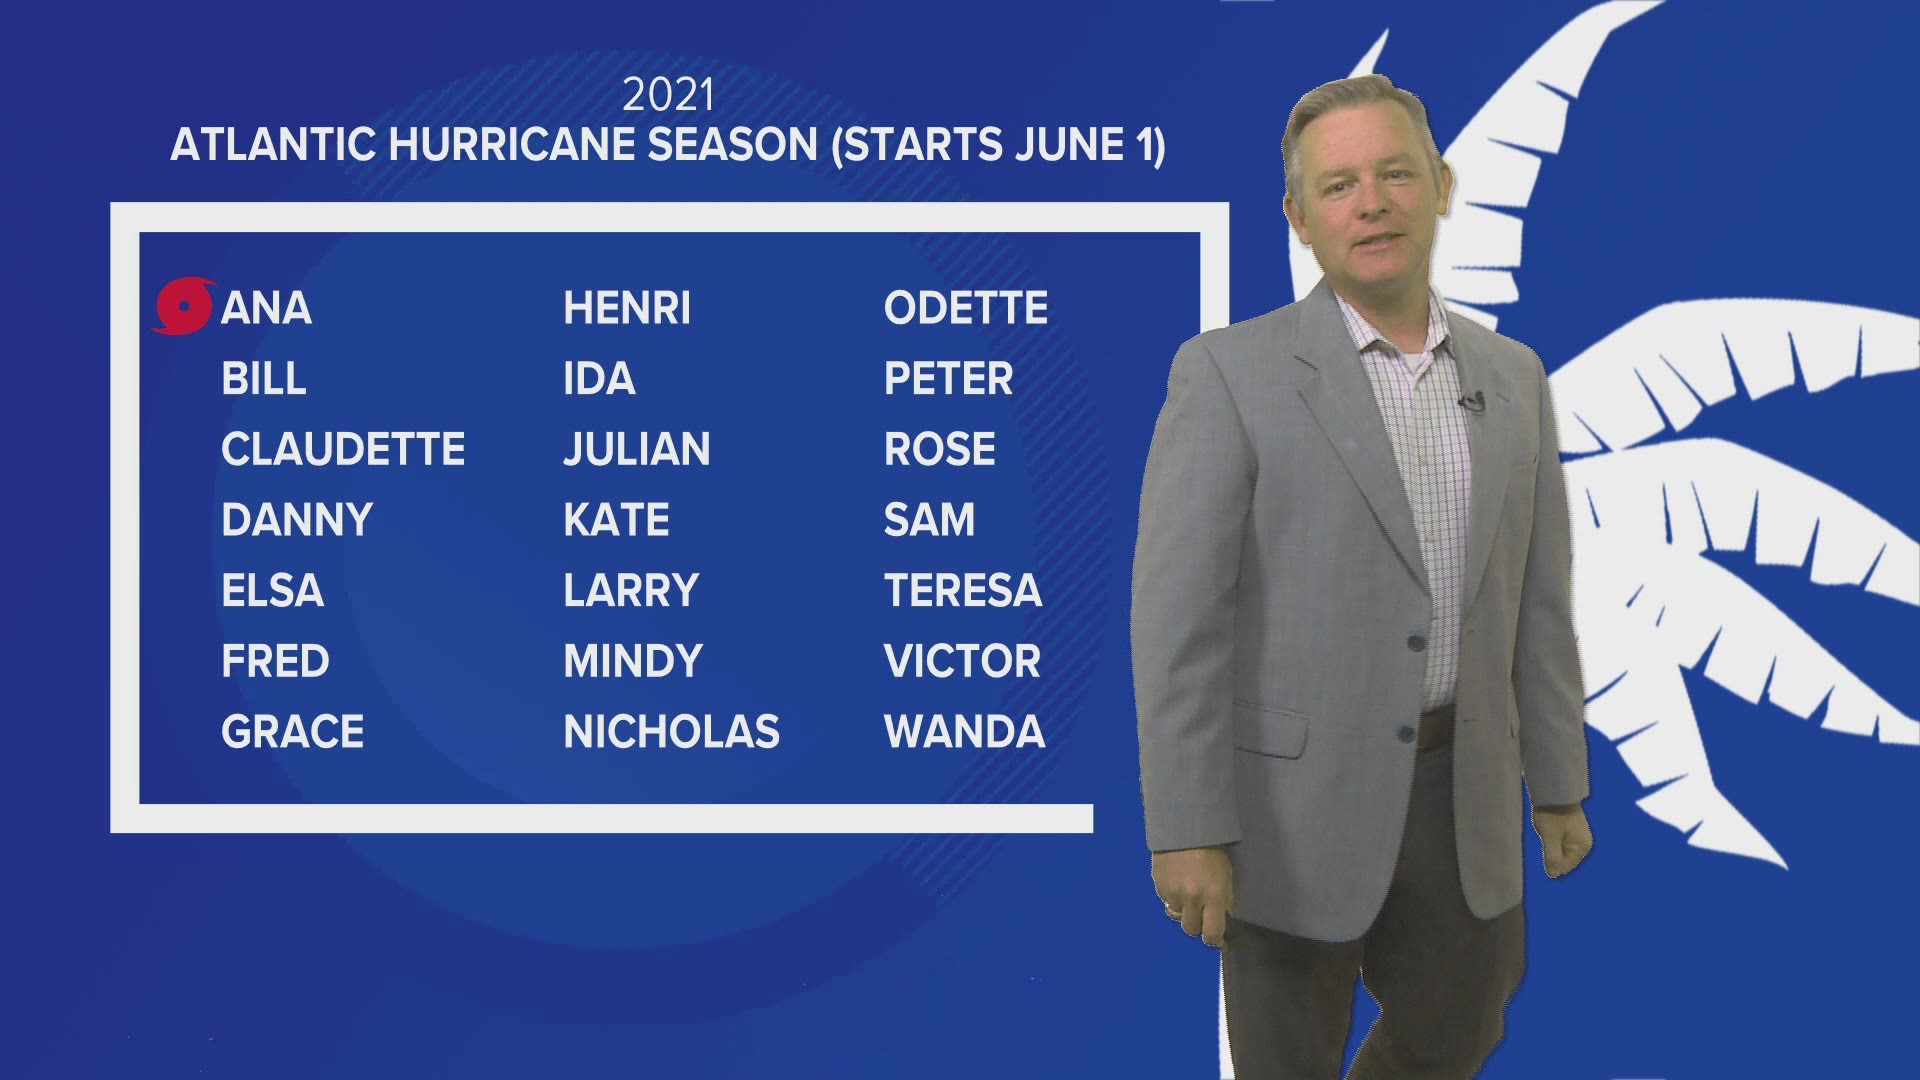 Ana dissipated, but it was the first named storm of the 2021 season. The official start of hurricane season is next week.